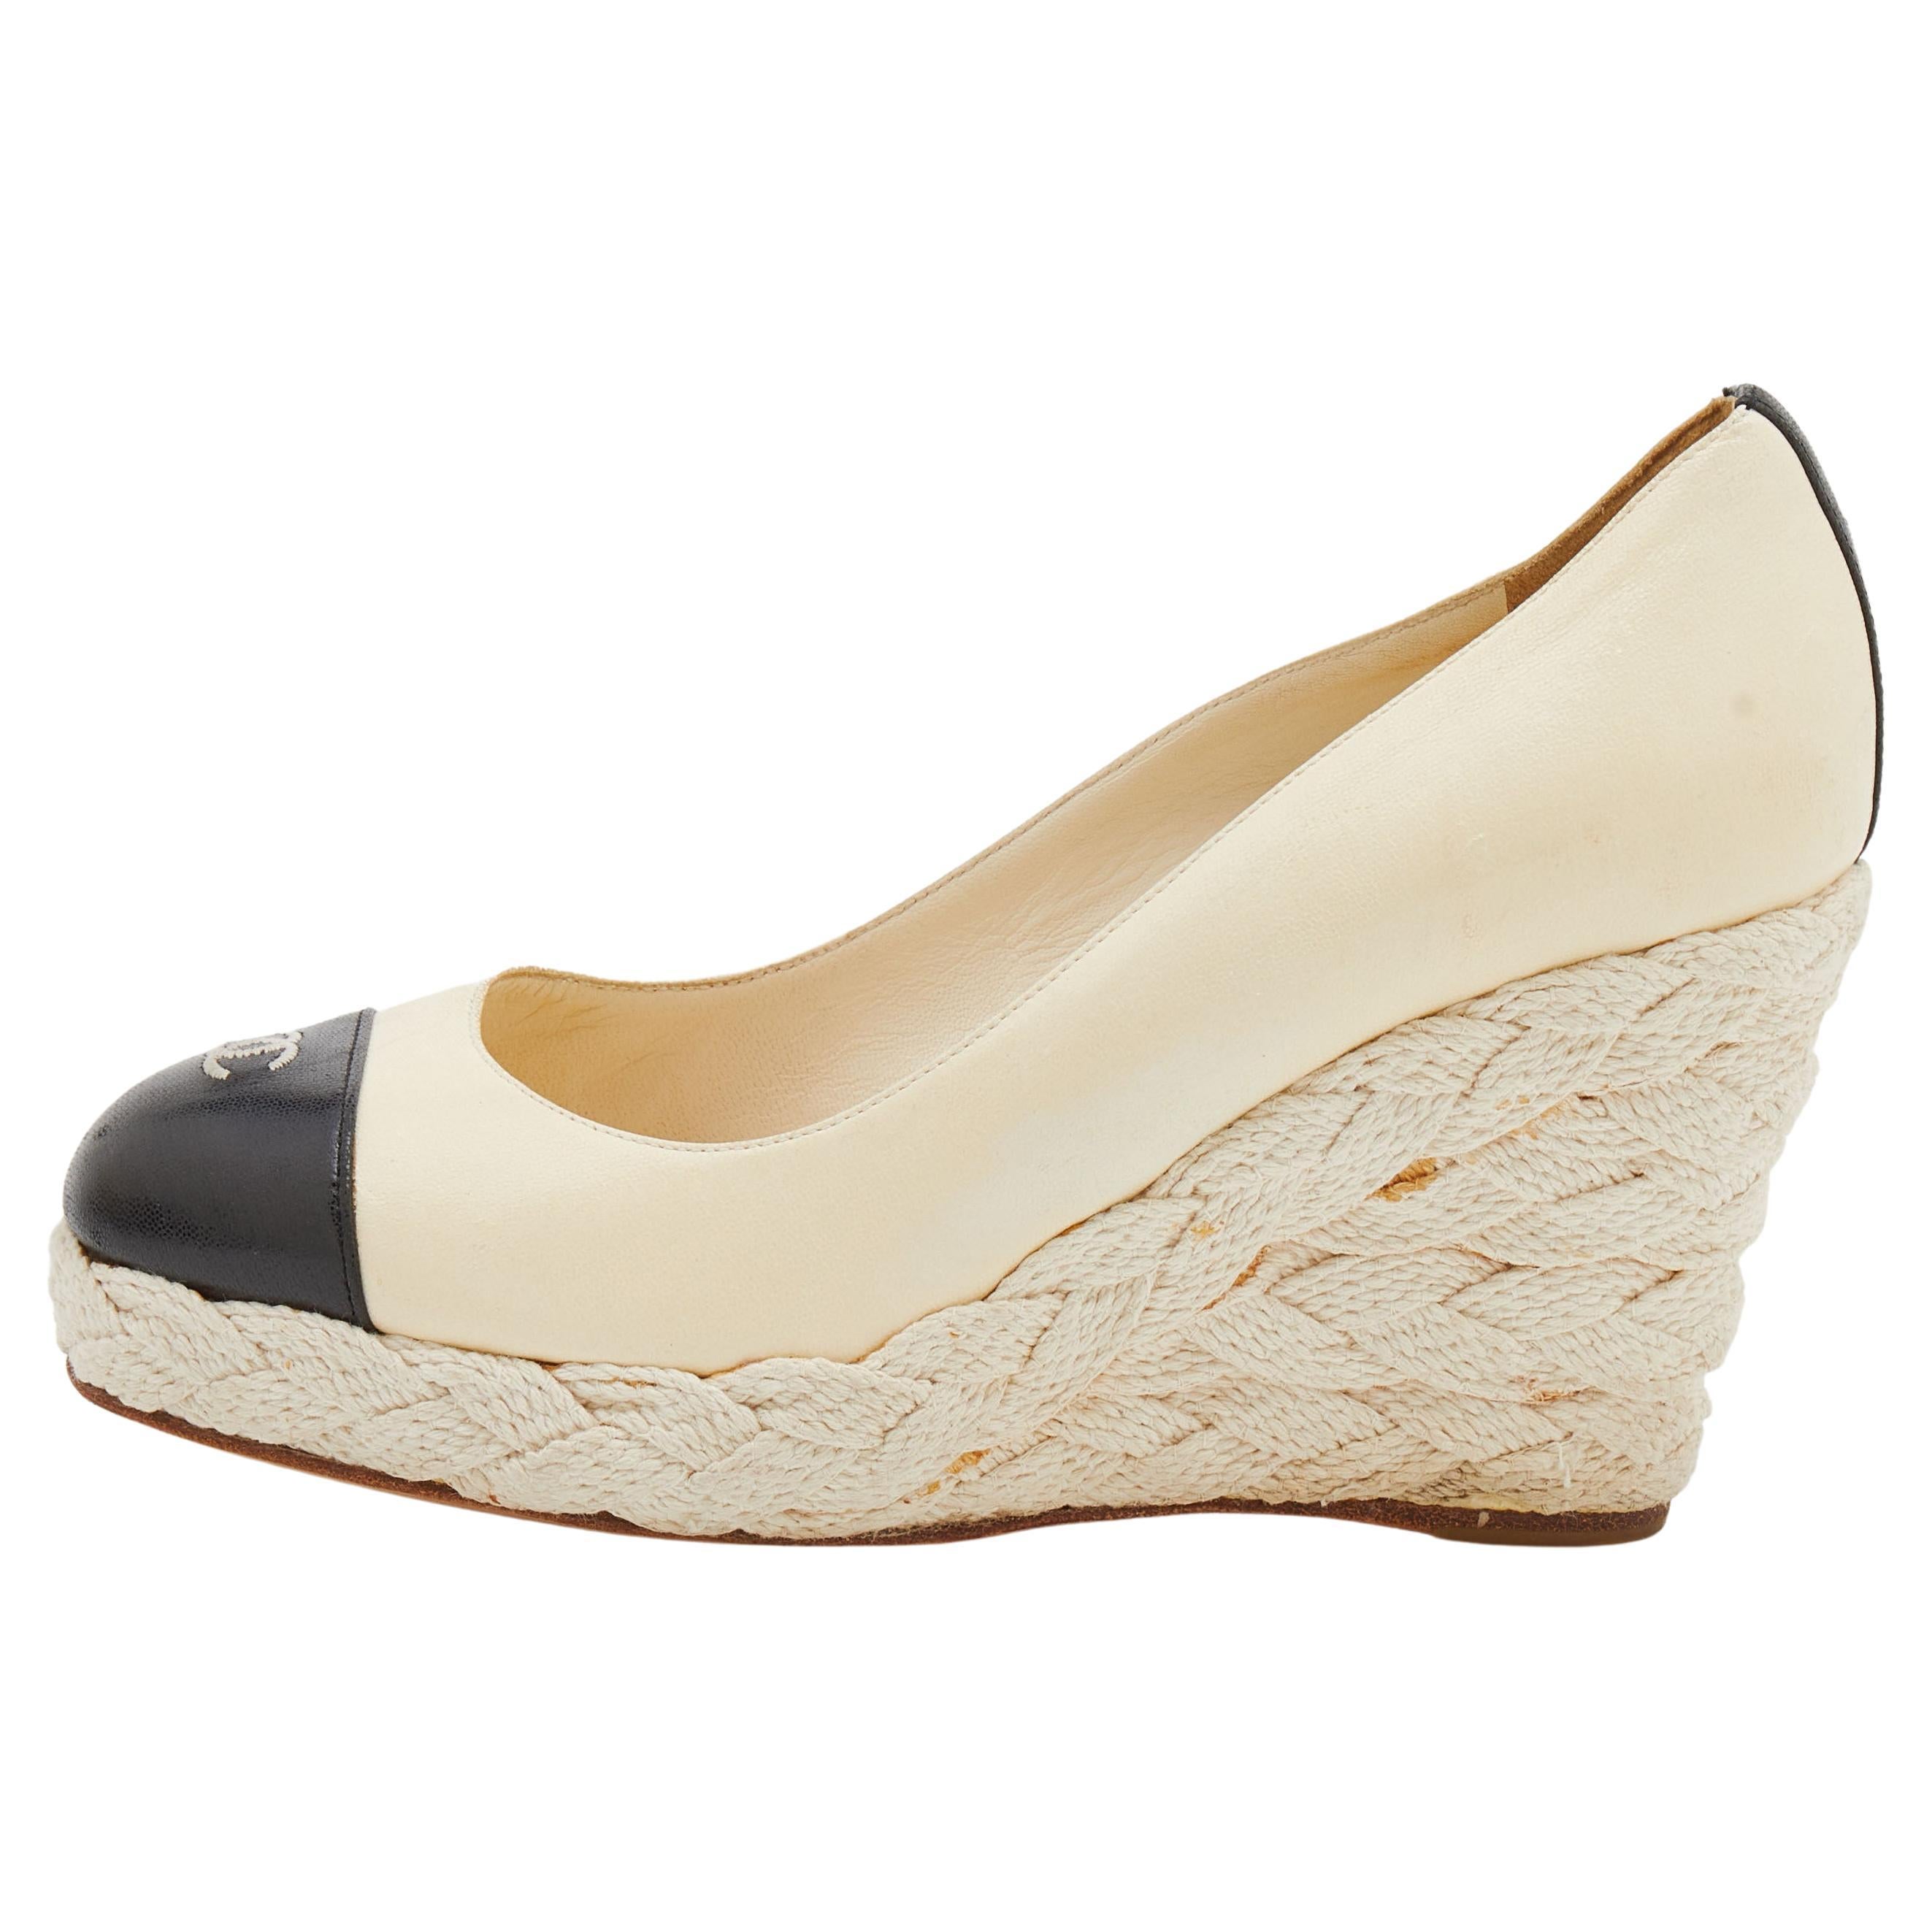 Chanel Wedge Espadrilles - For Sale on 1stDibs